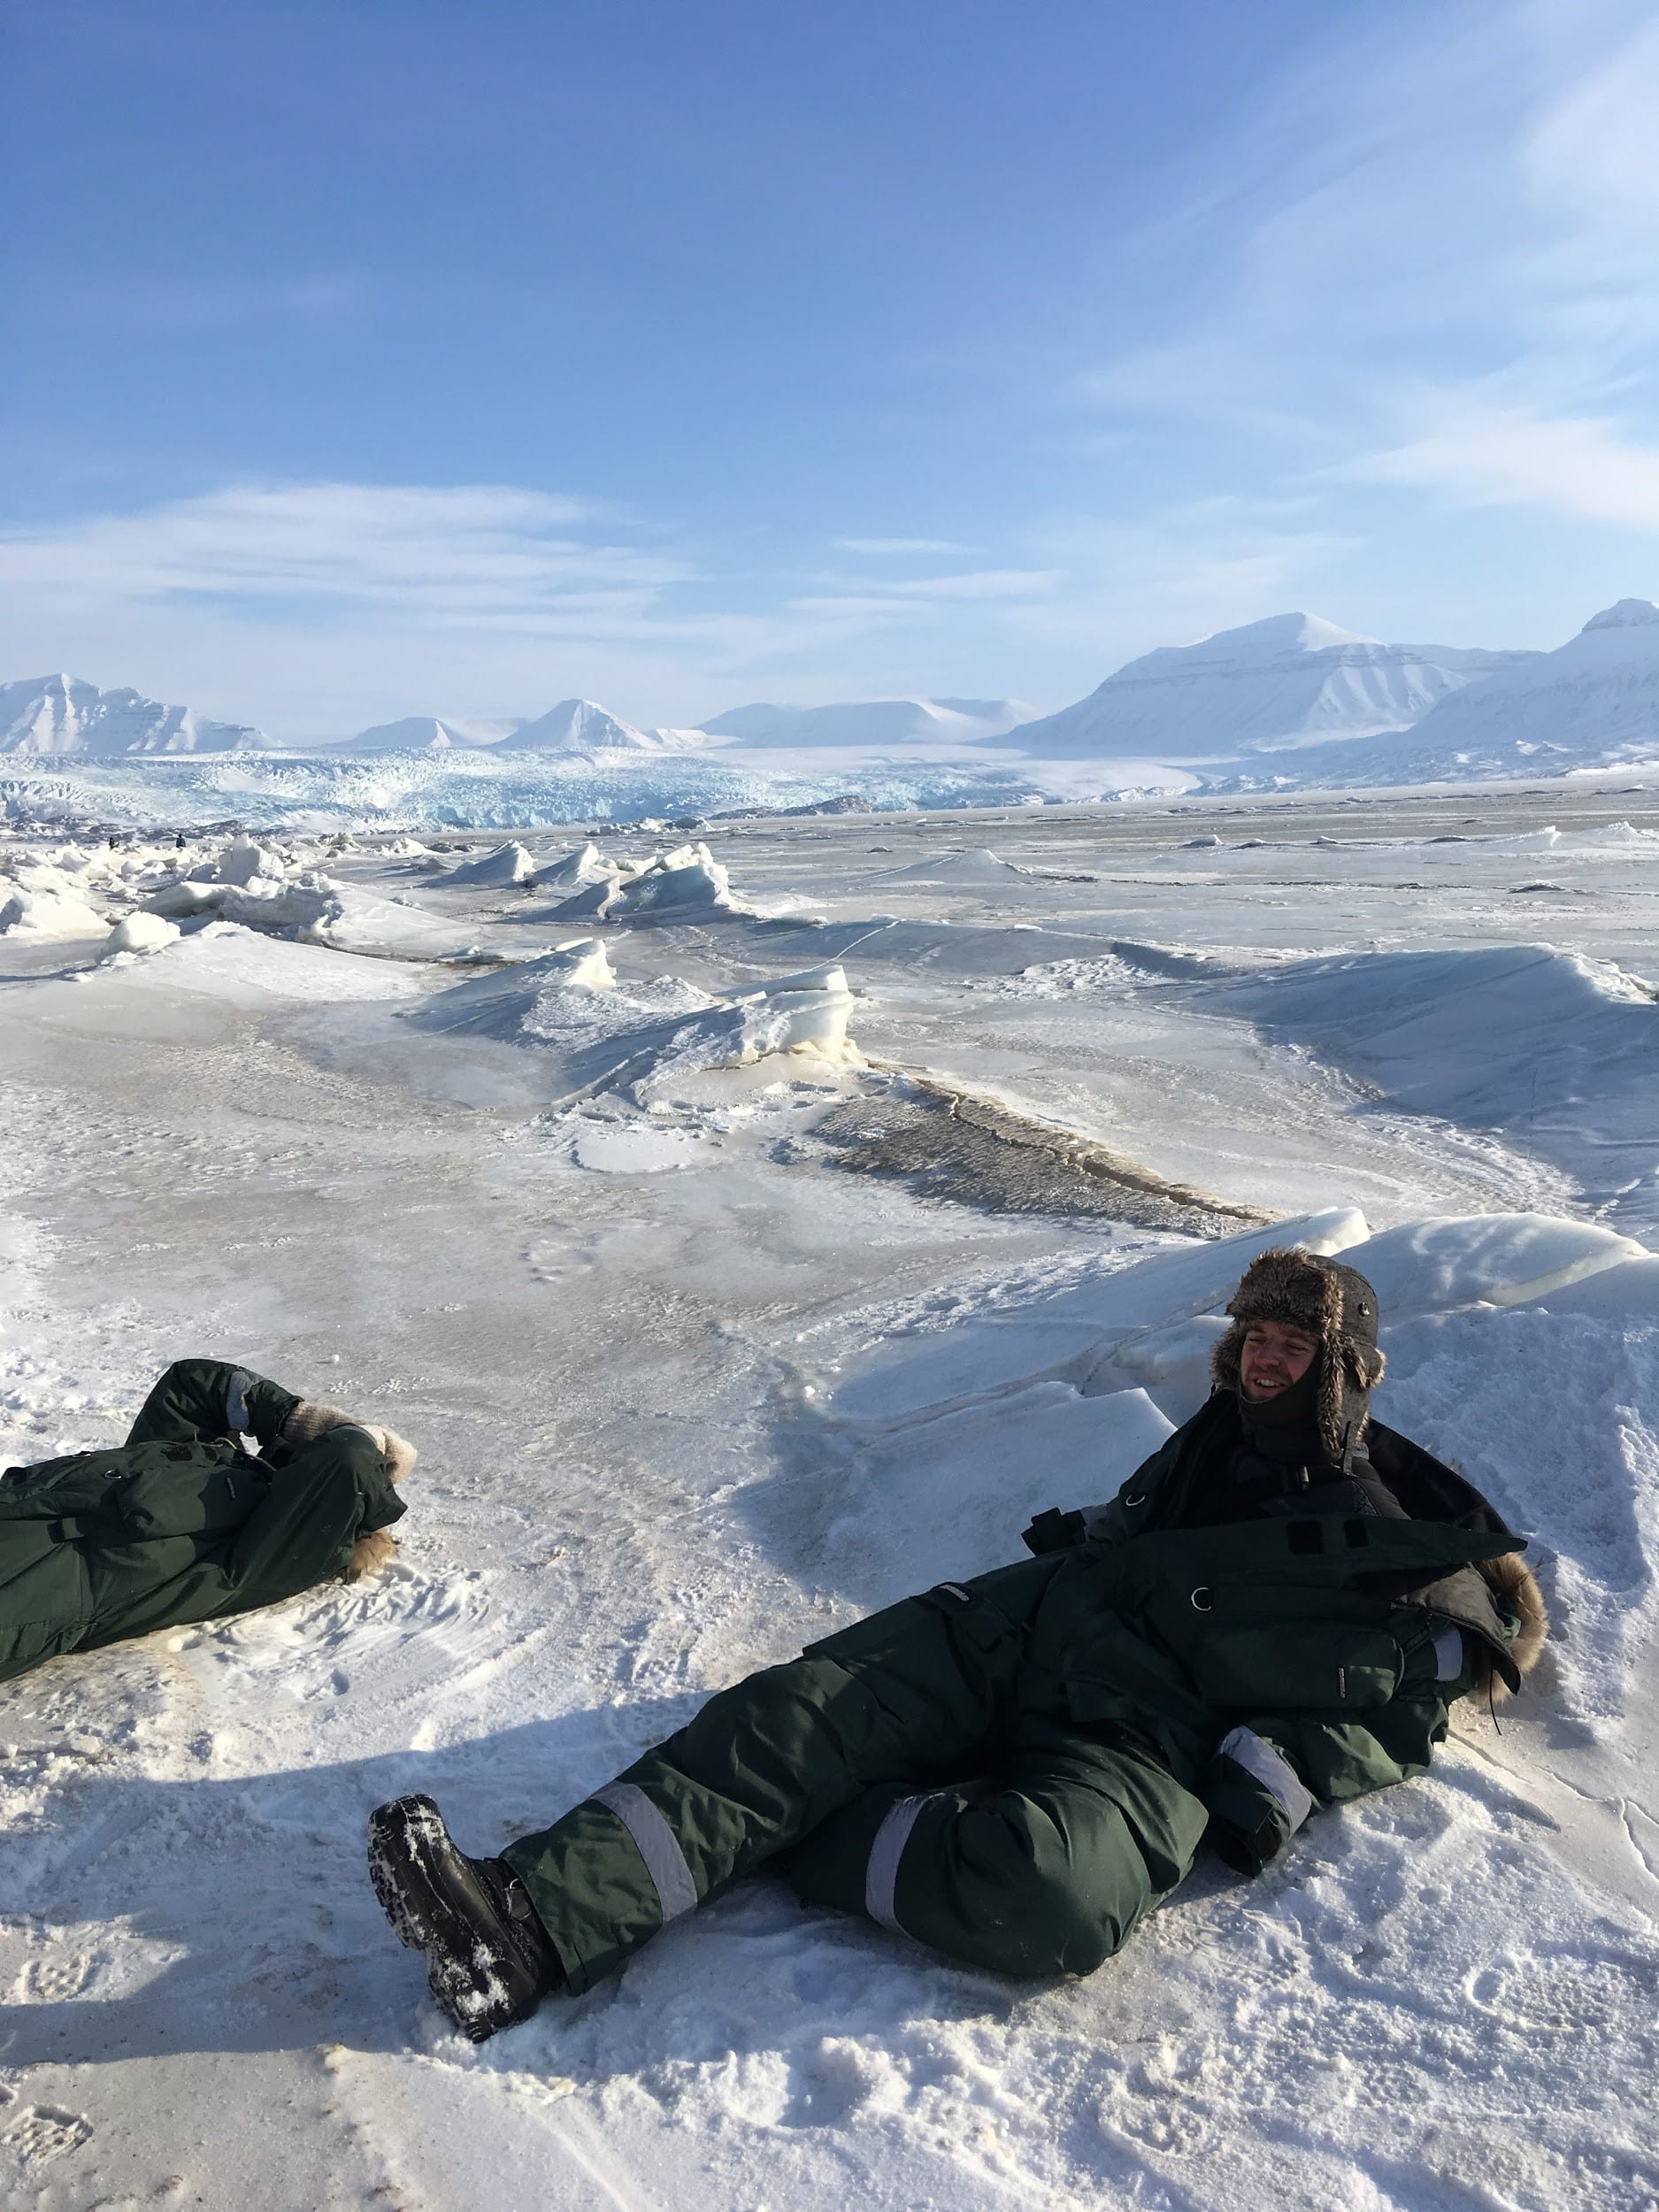 Two people bundled in winter clothing lounging on bed of snow and ice with blue sky in background